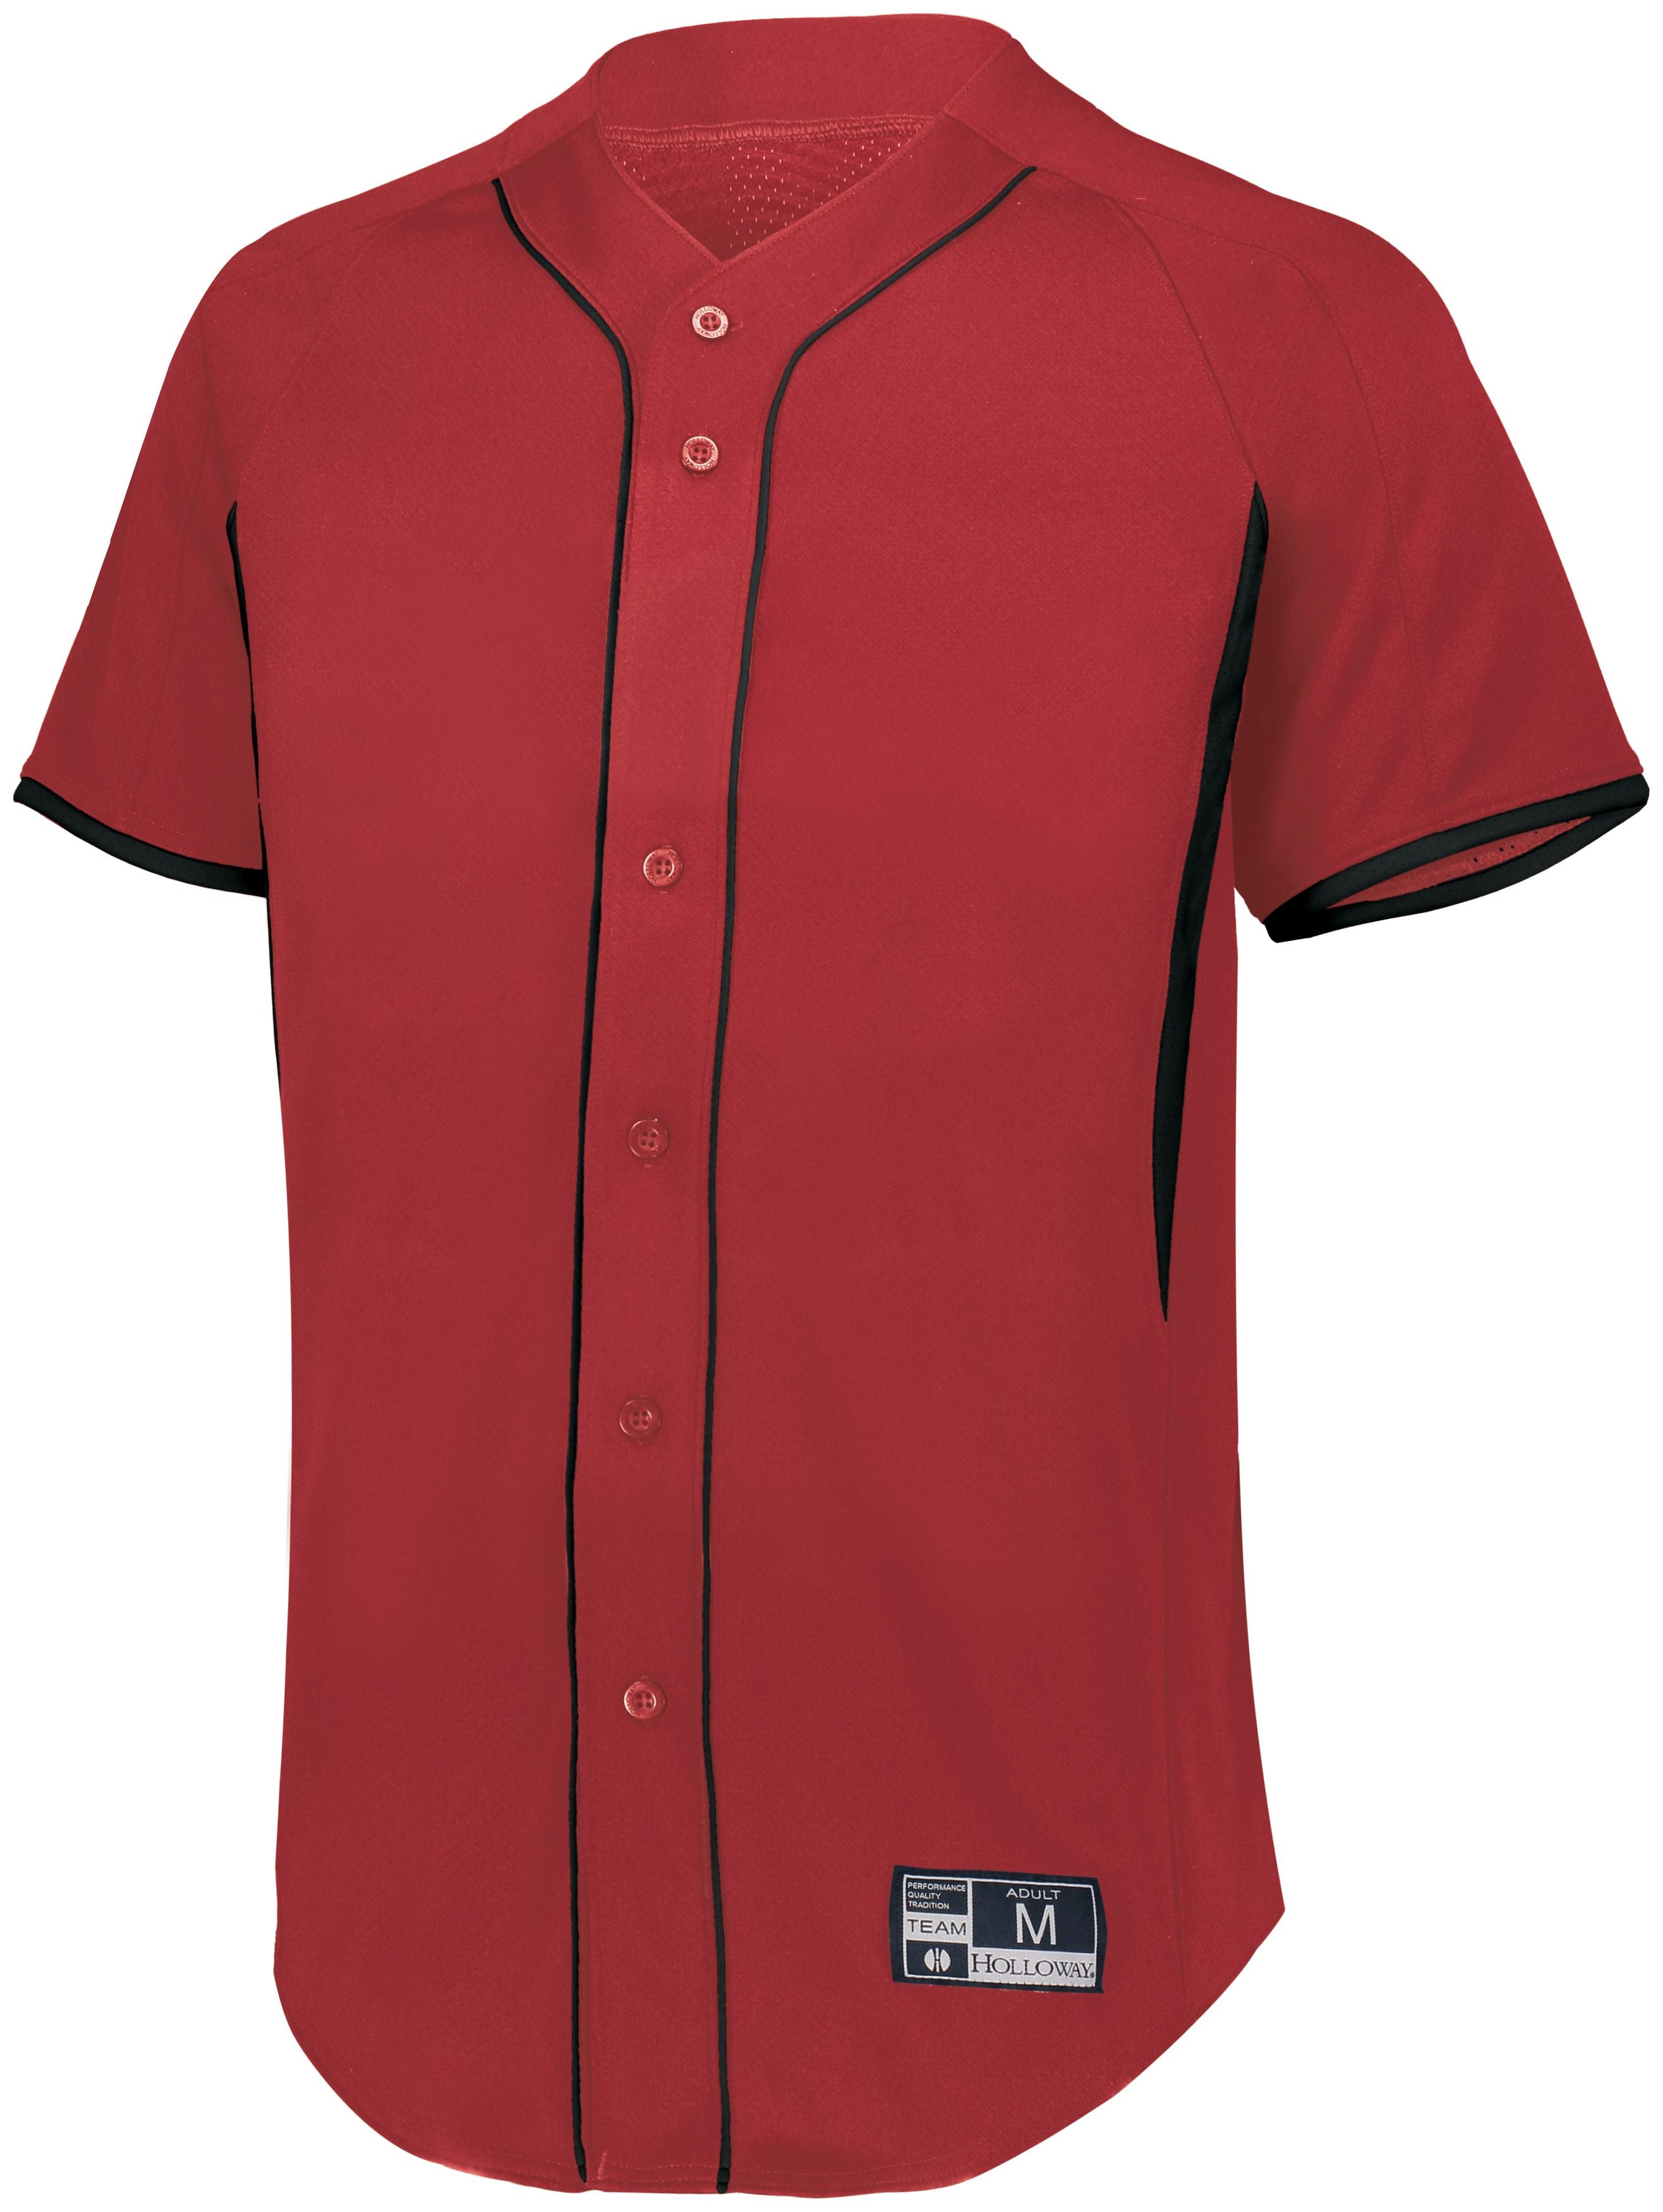 Holloway Game7 Full-Button Baseball Jersey in Scarlet/Black  -Part of the Adult, Adult-Jersey, Baseball, Holloway, Shirts, All-Sports, All-Sports-1 product lines at KanaleyCreations.com